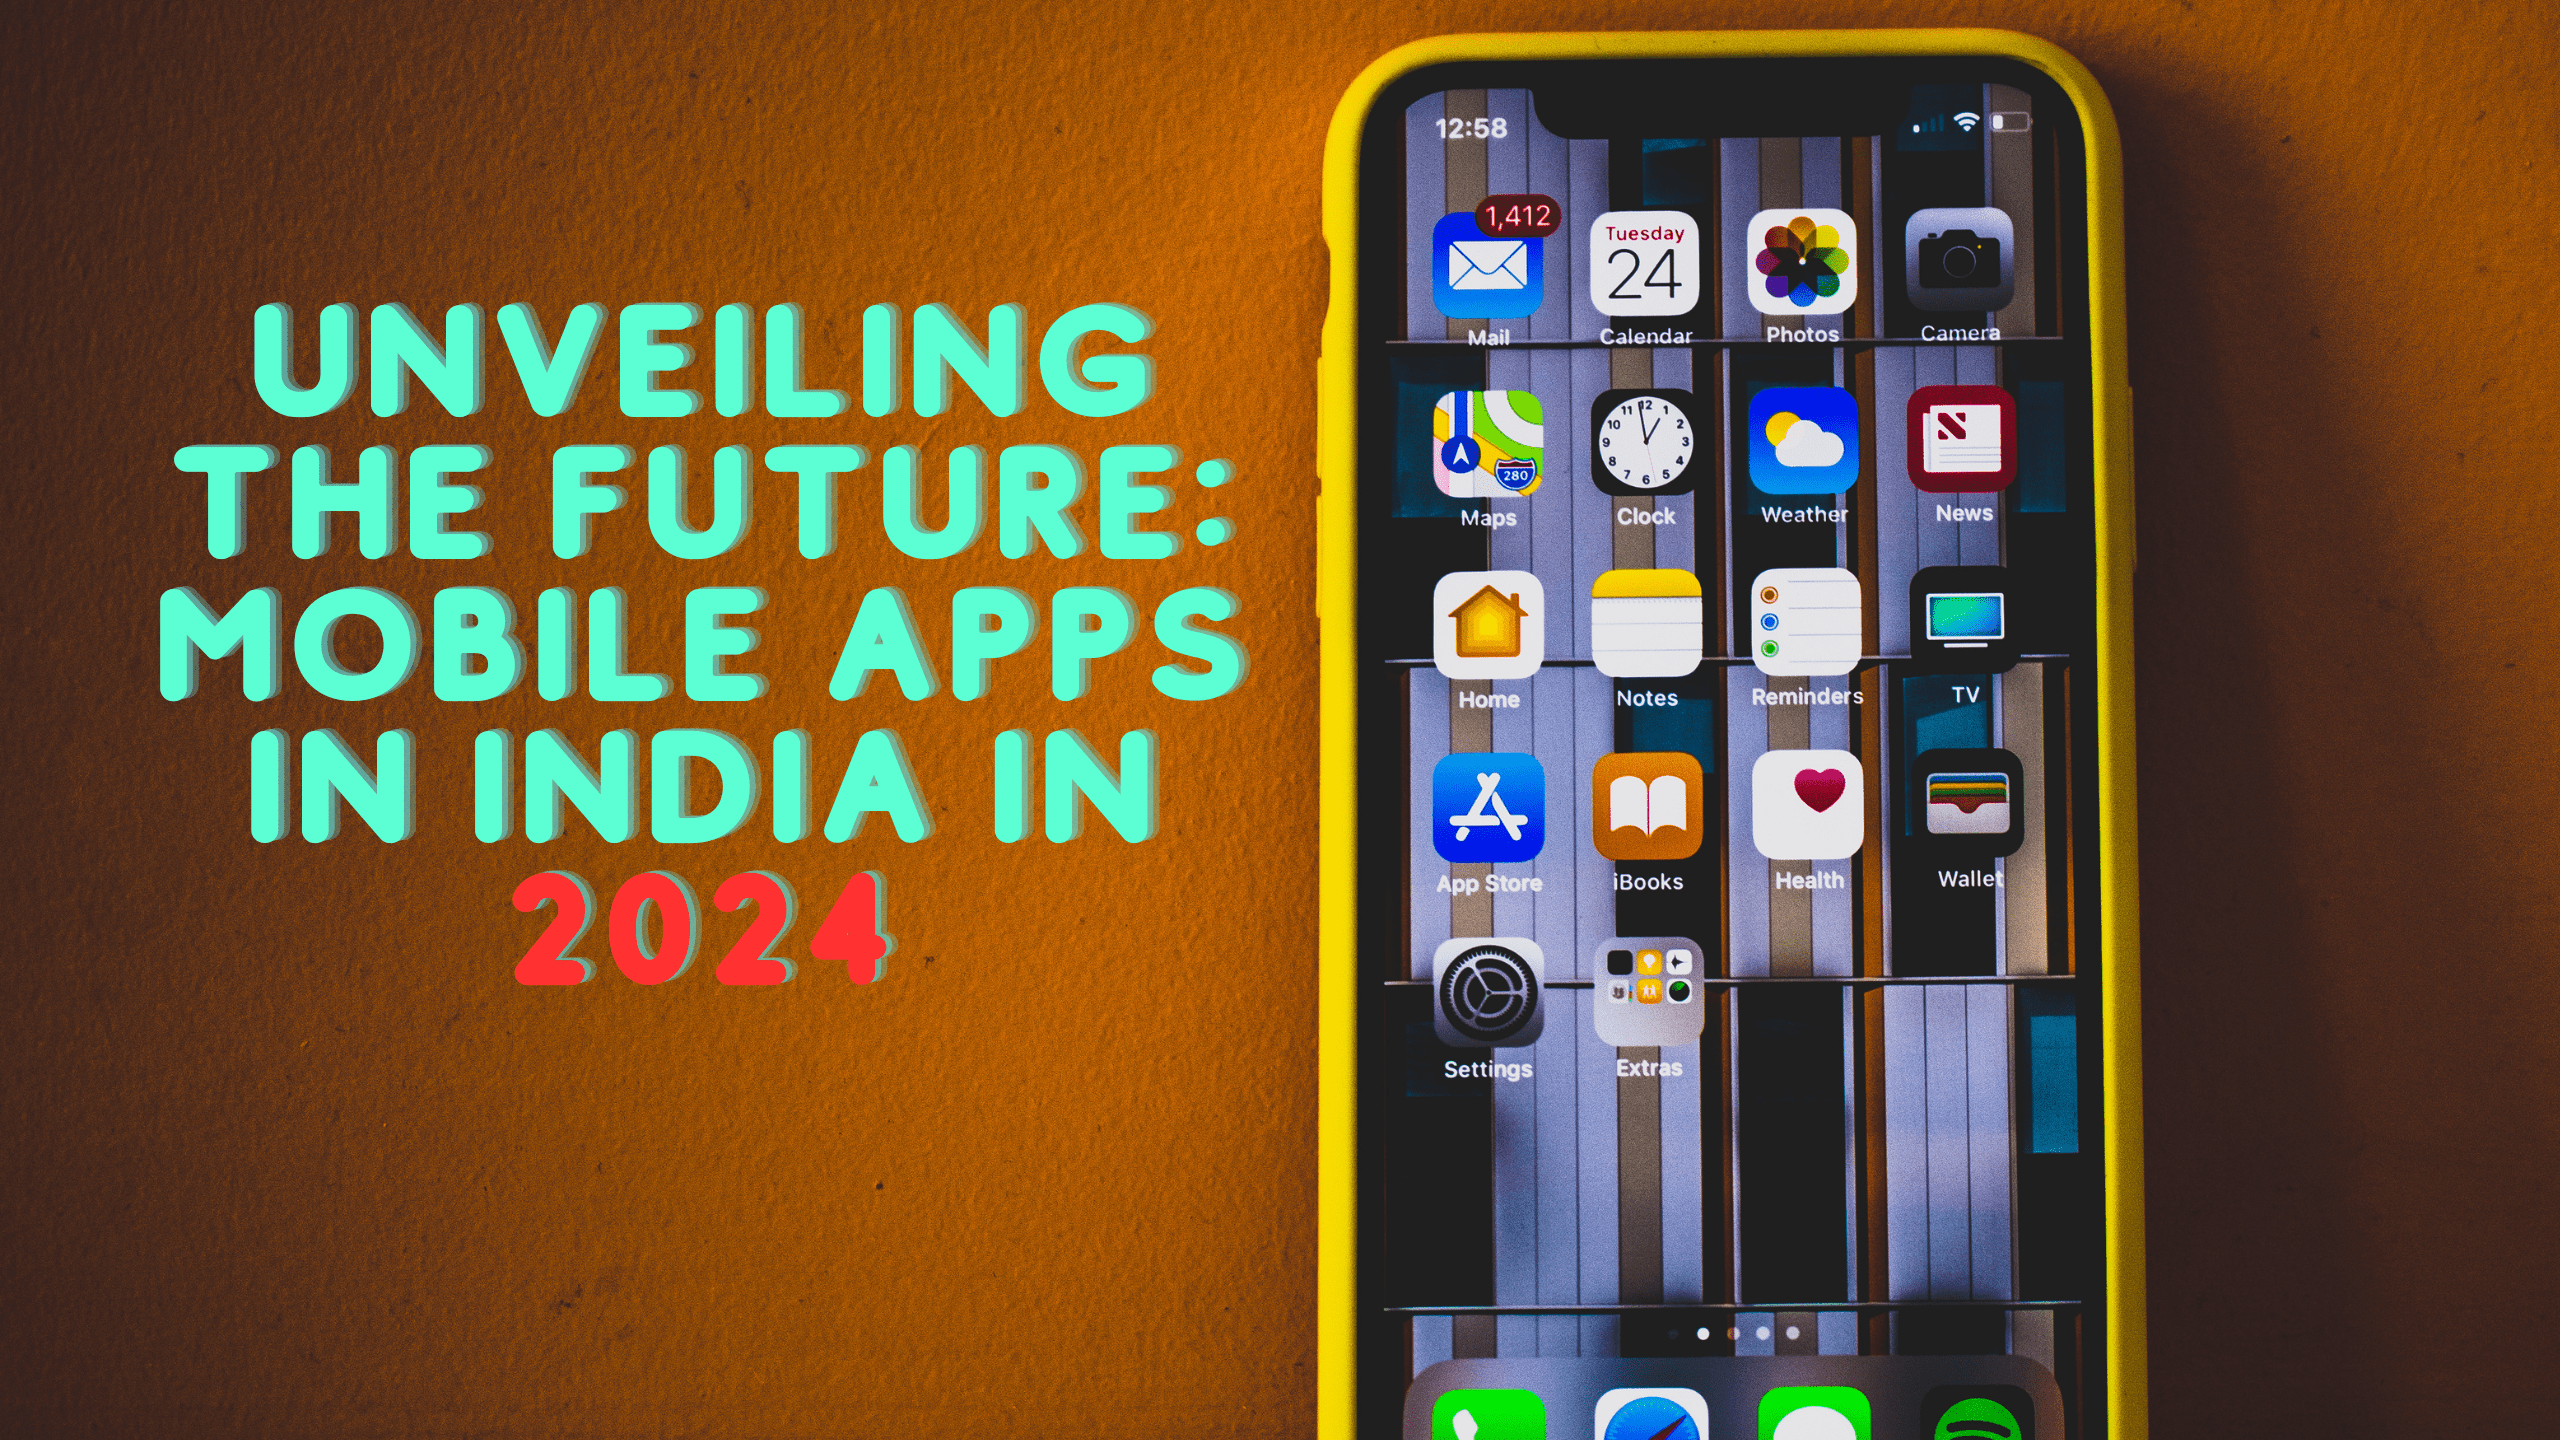 Unveiling the Future: Mobile Apps in India in 2024